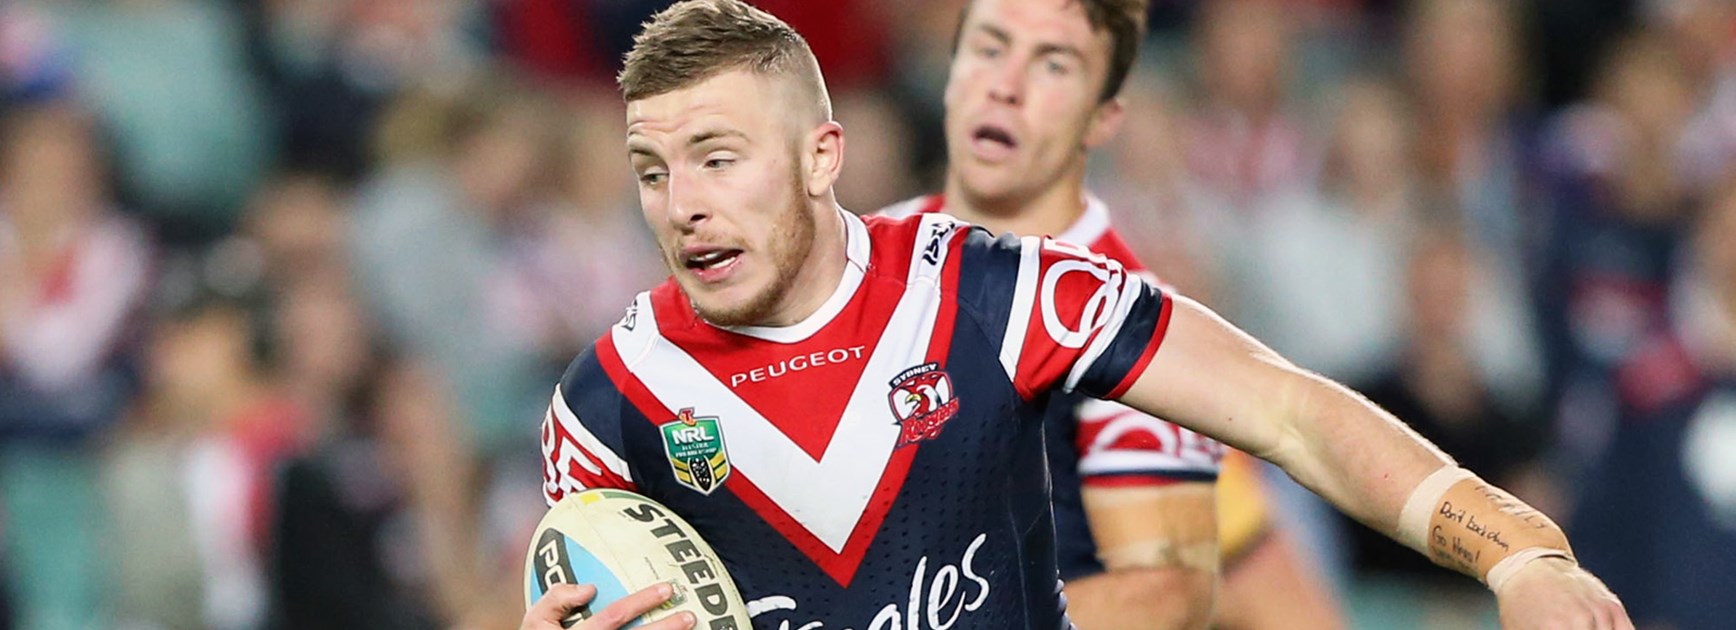 With Mitchell Pearce away in Origin camp, Roosters utility Jackson Hastings is set to play a bigger role for his side in Round 14.